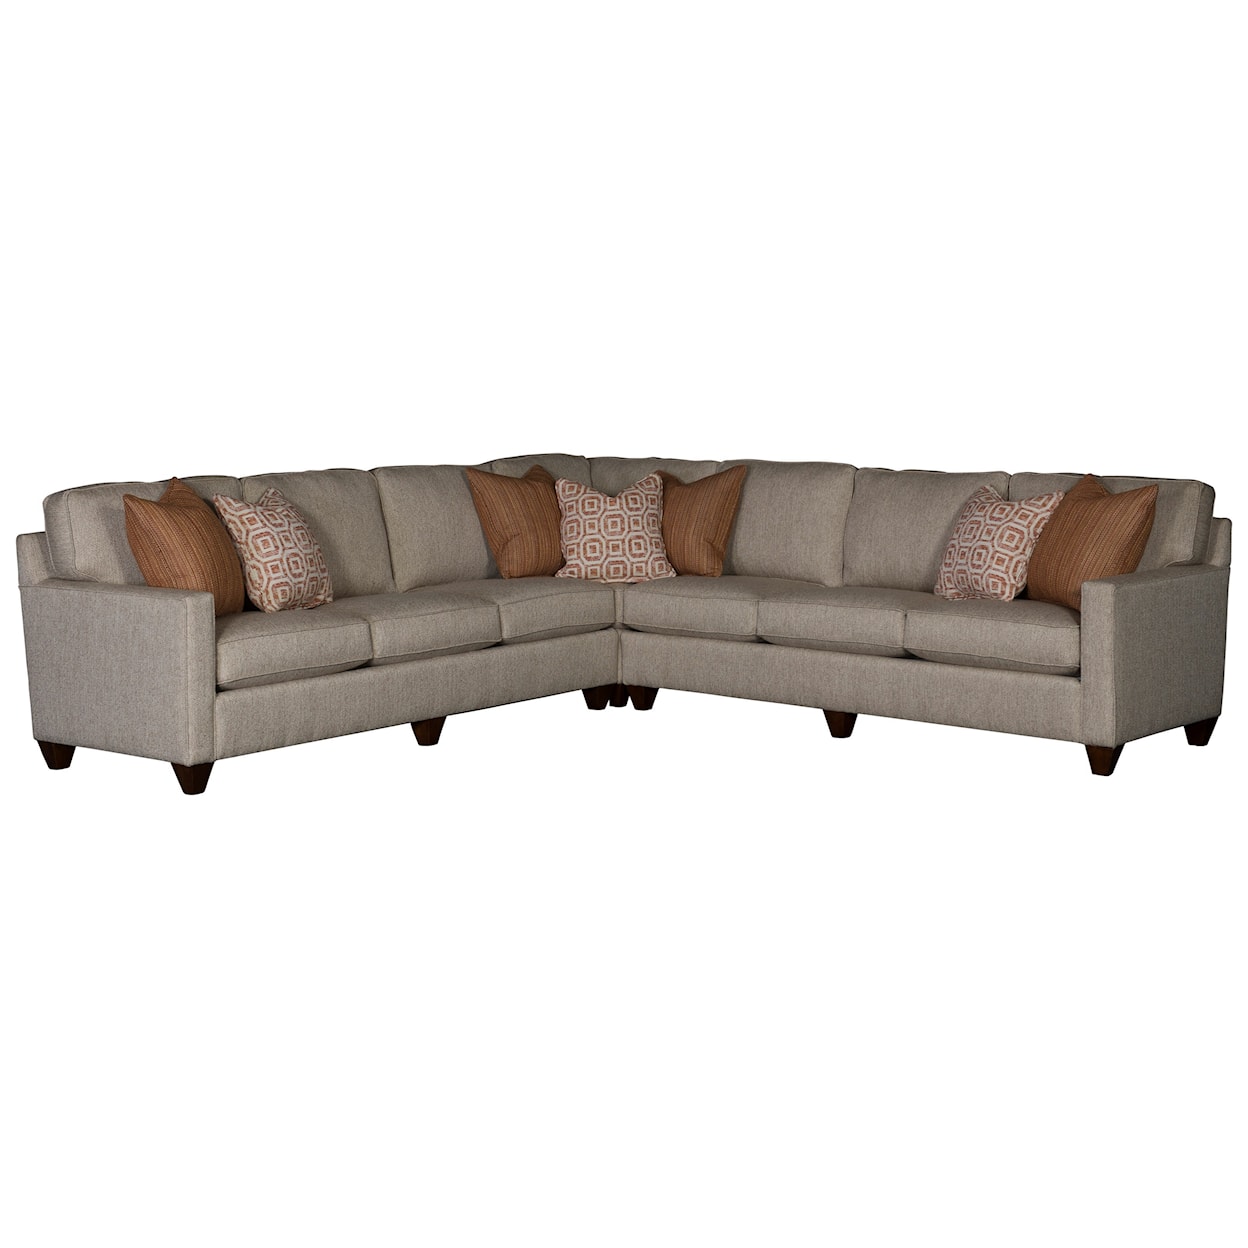 Mayo 3830 Sectional Sofa with 6 Seats